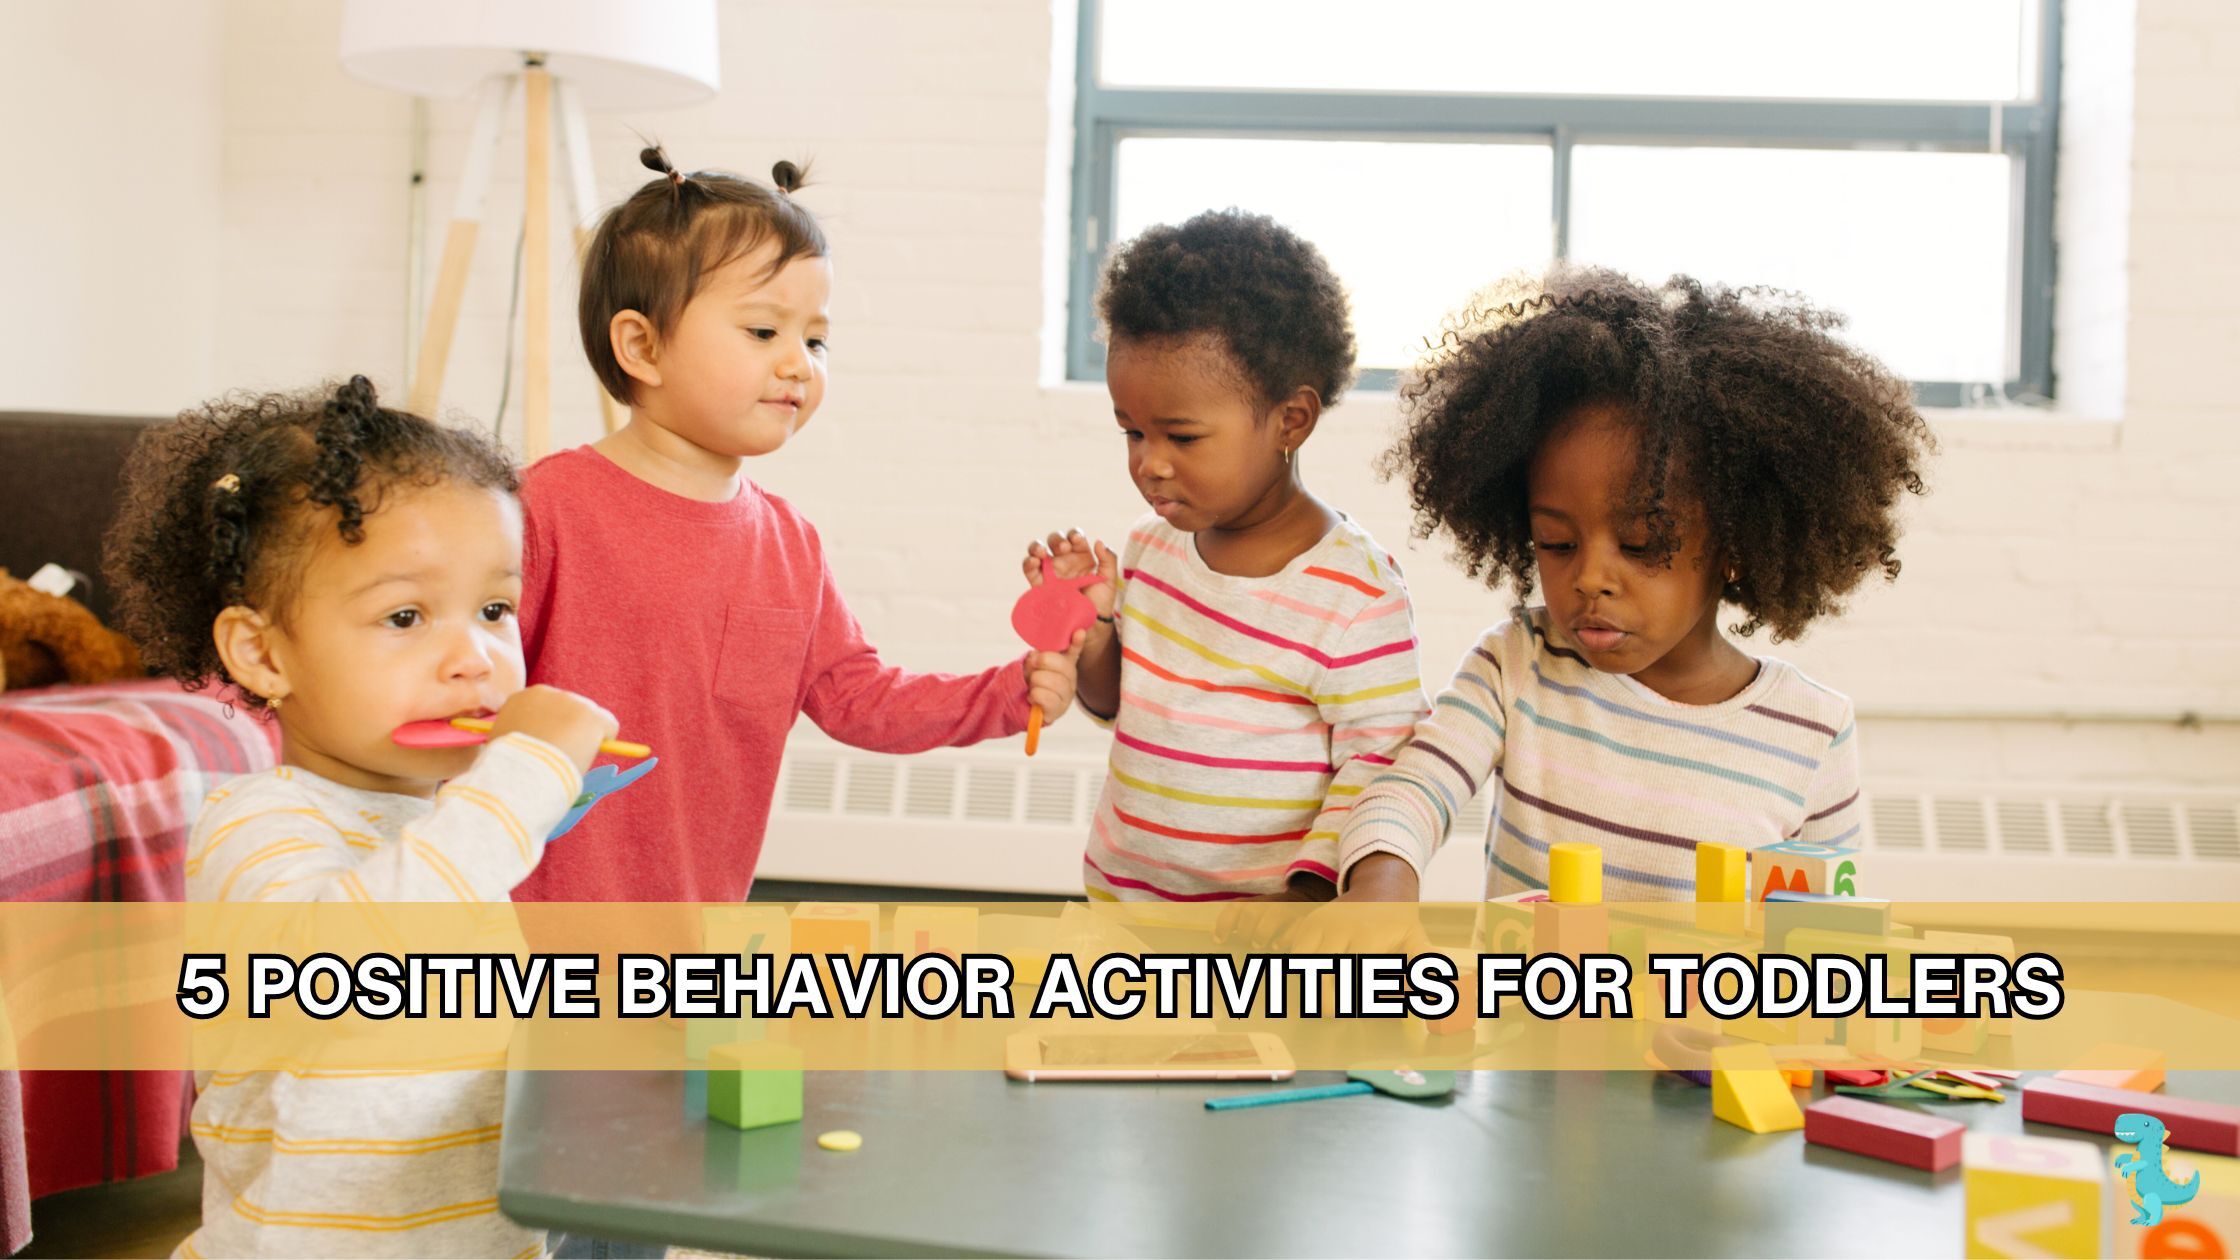 5 Positive Behavior Activities for Toddlers